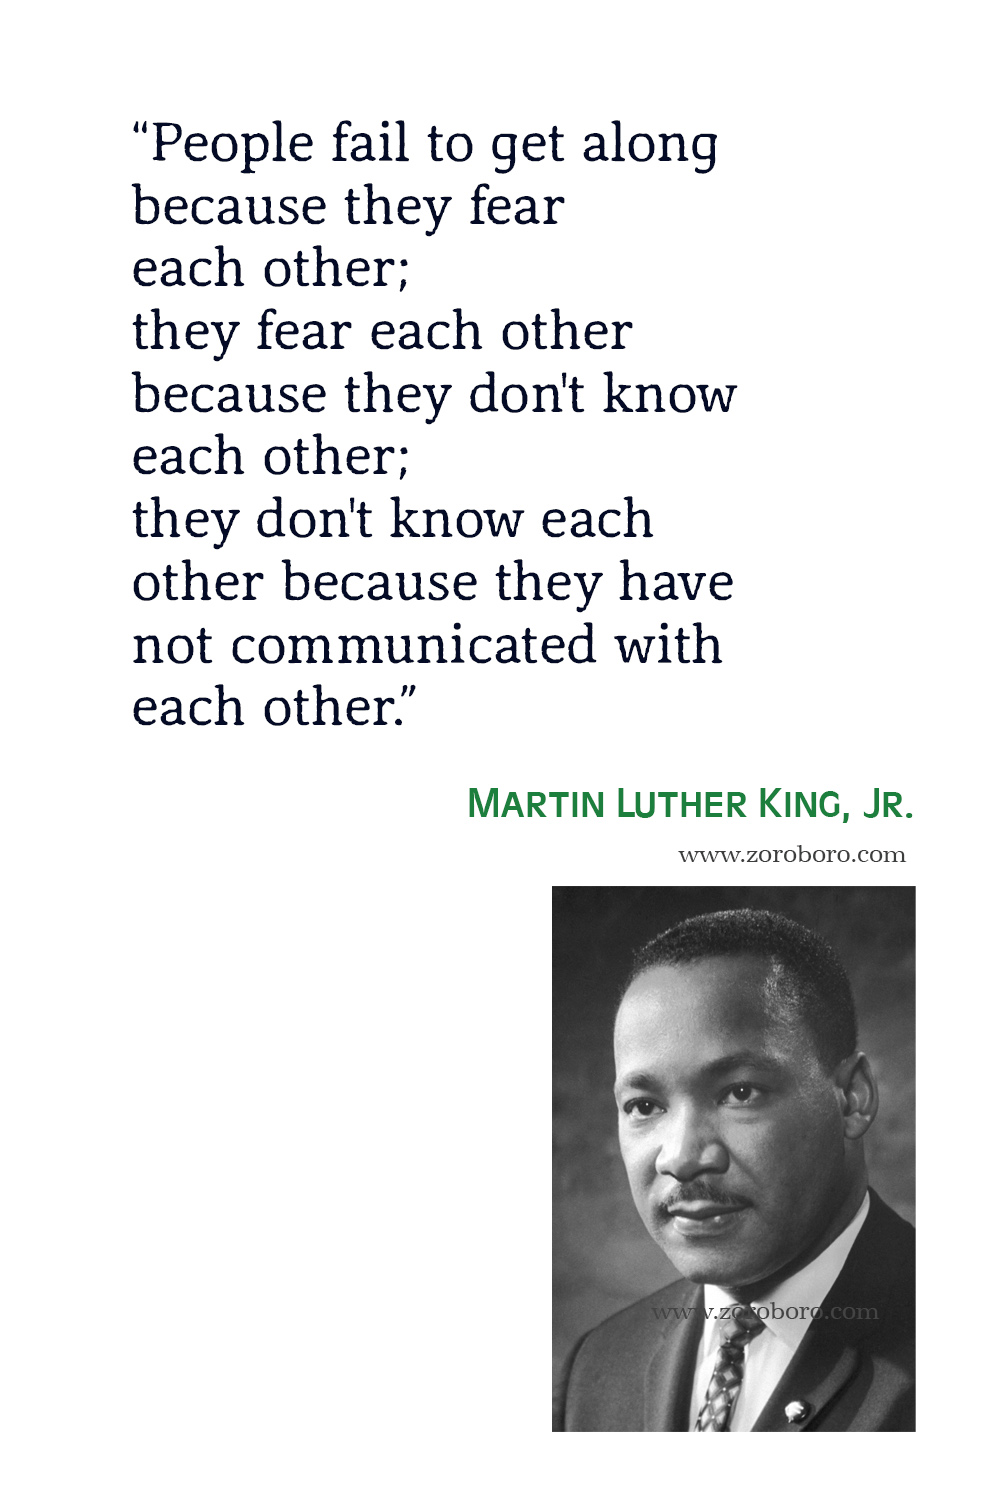 Martin Luther King Jr. Quotes, Martin Luther King Jr. Courage, Inspirational, Kindness, Leadership, Success Quotes, Martin Luther King Jr.